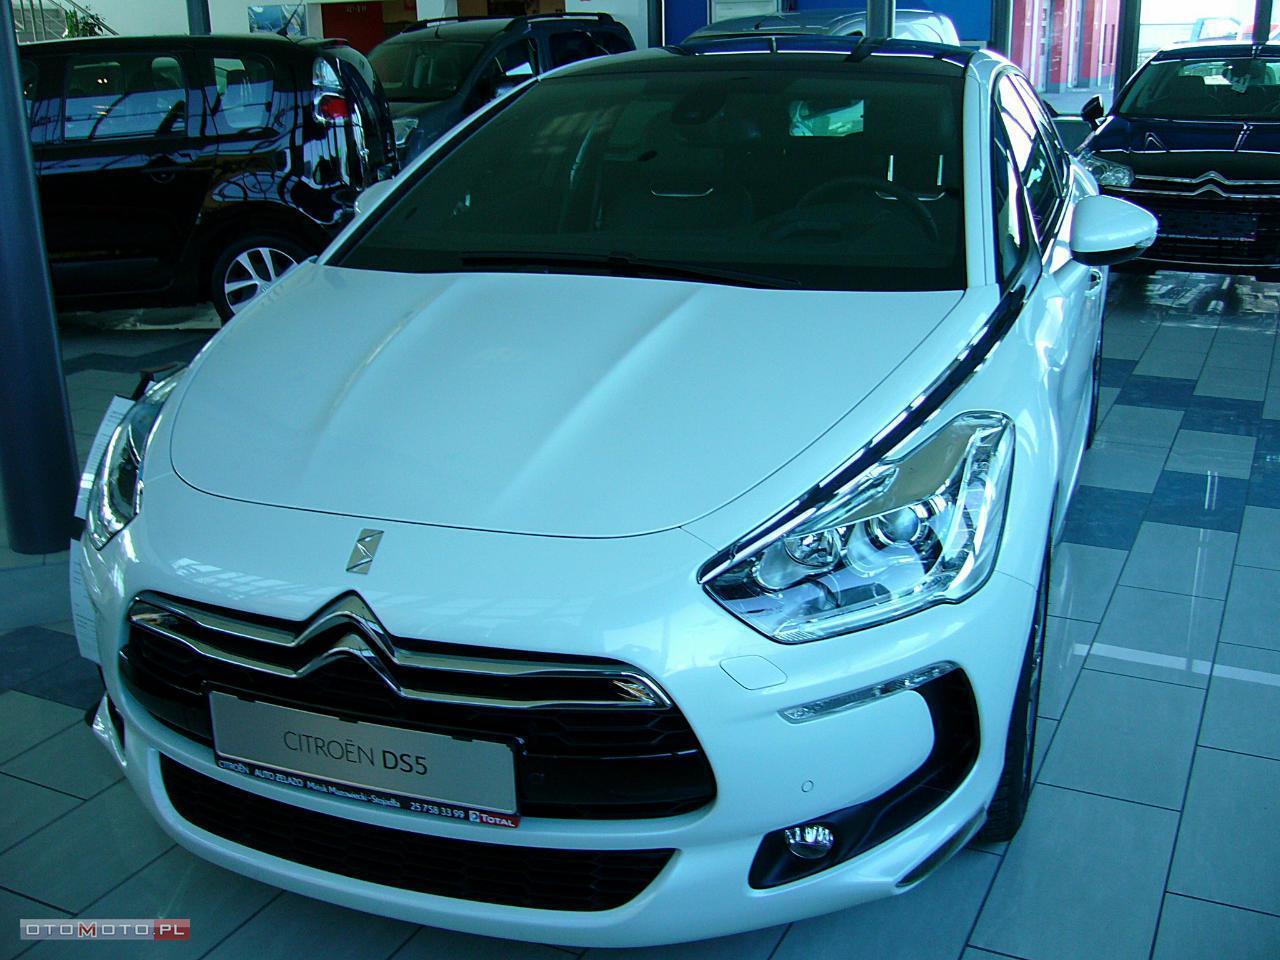 Citroën DS5 NOWY 2.0 HDI 163KM AUTOMAT